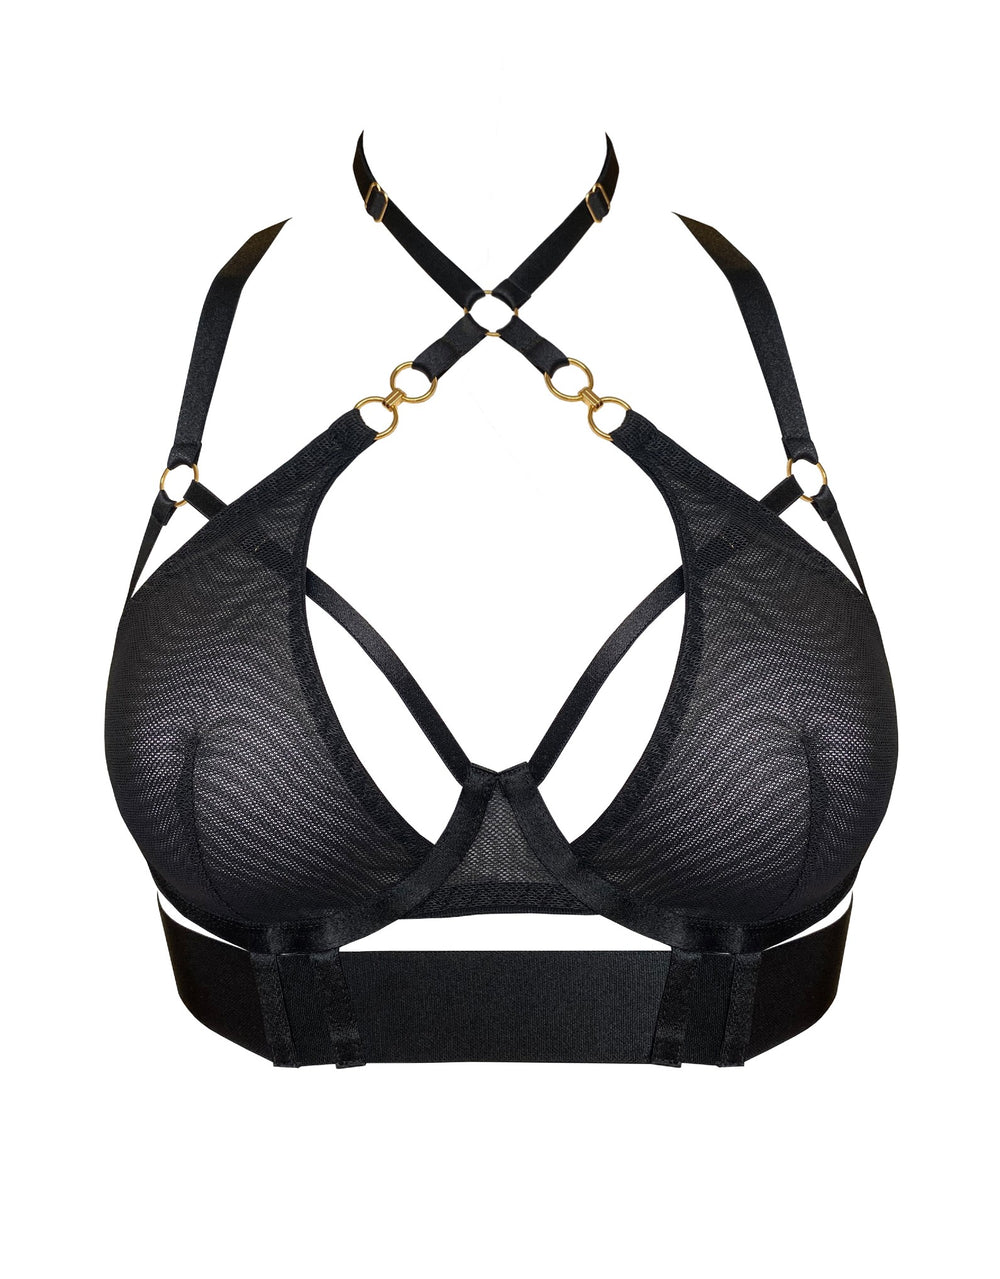 Designer Bras, Lace Bralettes, and Balconette Bras – tagged cf